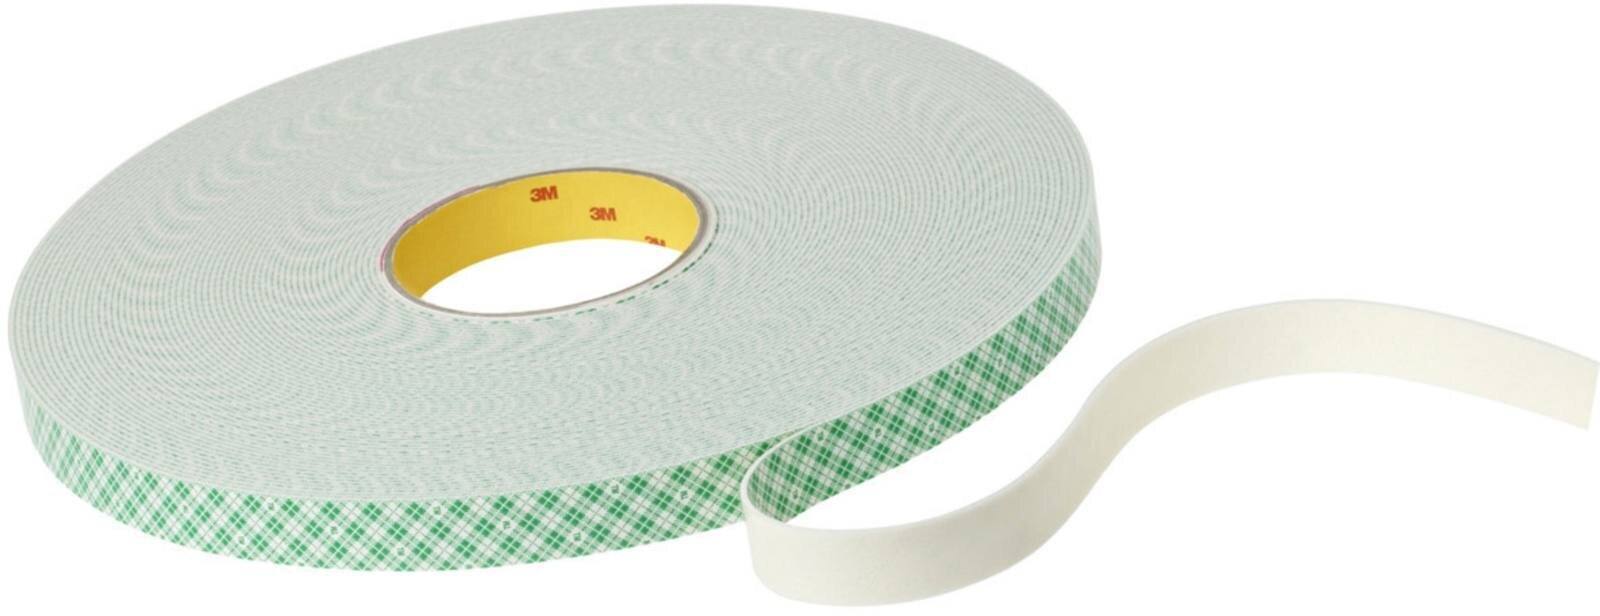 3M PU foam adhesive tape with acrylic adhesive 4026, beige, 19 mm x 33 m, 1.6 mm